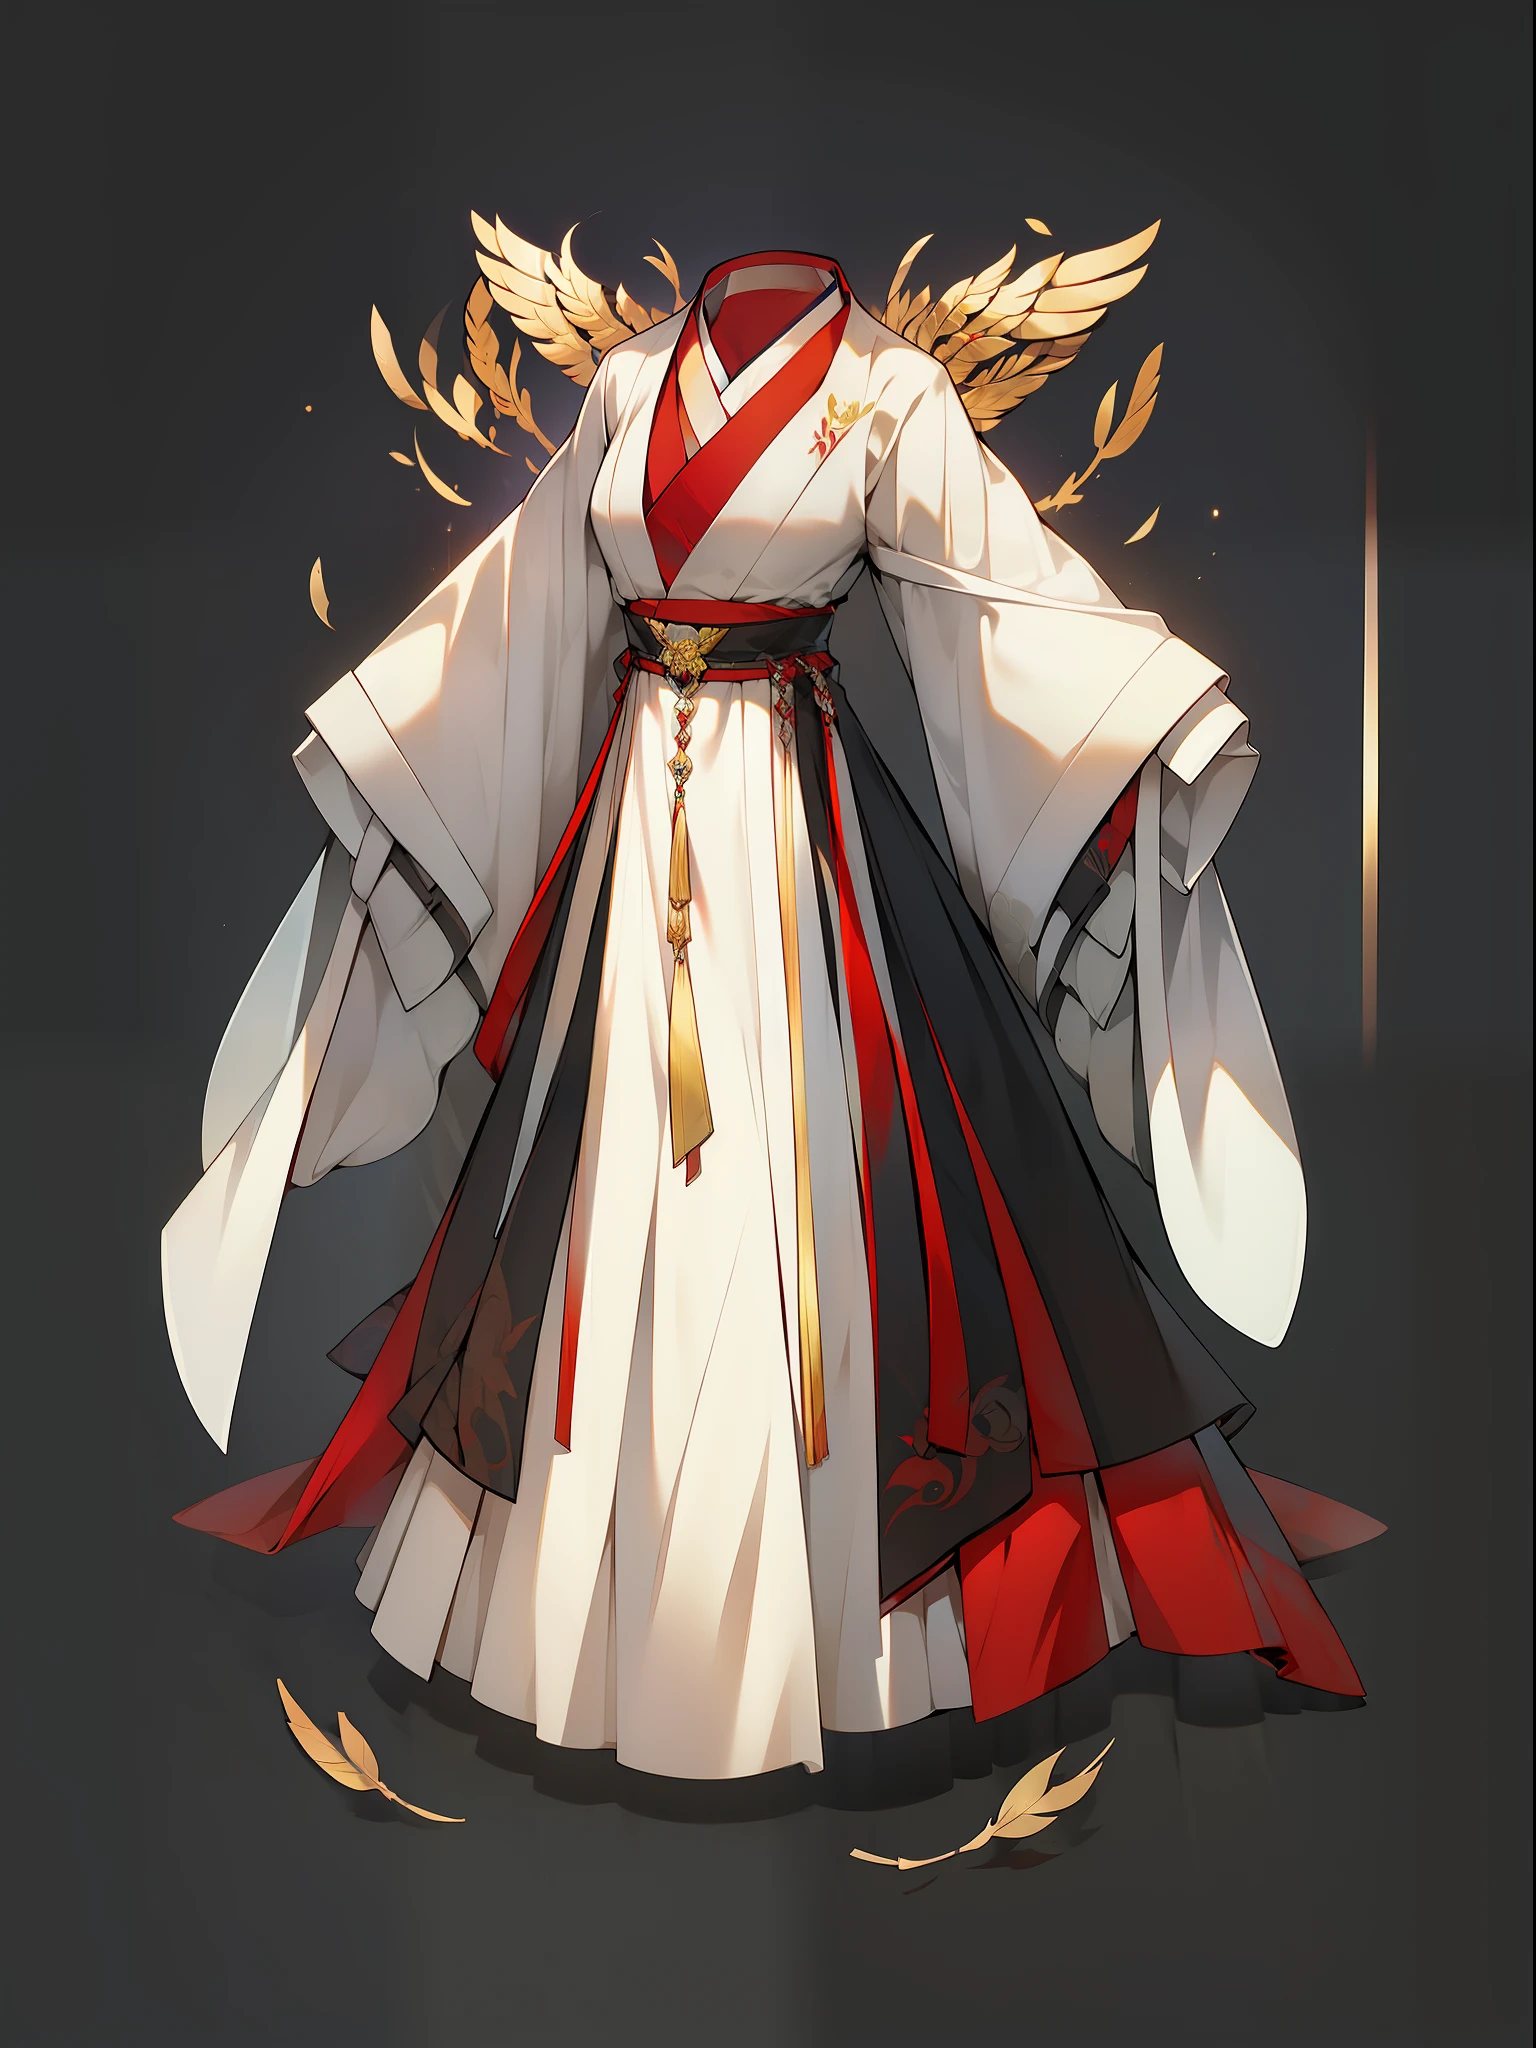 （NOhumans：1.5）， masterpaintings， Ultimate，（a color，feather hair），Ancient Chinese clothes，Gorgeous collared top，pleated long skirt，cloaks，gossamer，gold chains，red color Hanfu，Phnom Penh embroidery，gameicon，